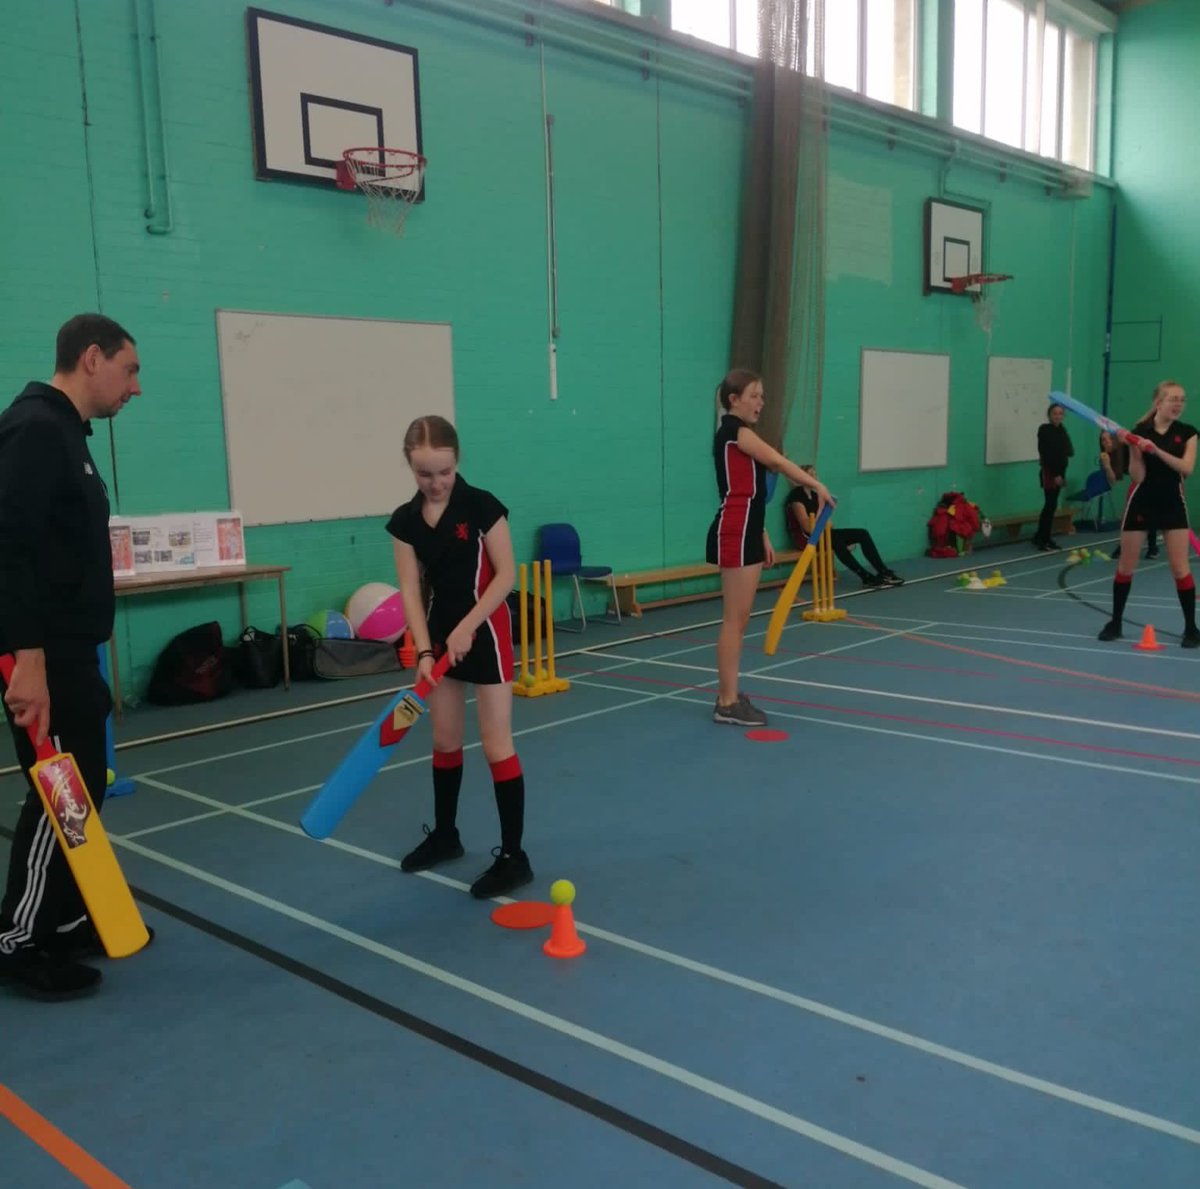 #Benfleet #Cricket club is looking for players for their girls team. Last half term we enjoyed two days of taster sessions. We looked at batting, bowling and fielding techniques. Thank you Benfleet cricket club for coming to visit! #PE #KingJohn #KingJohnSchool #KJS #Zenith